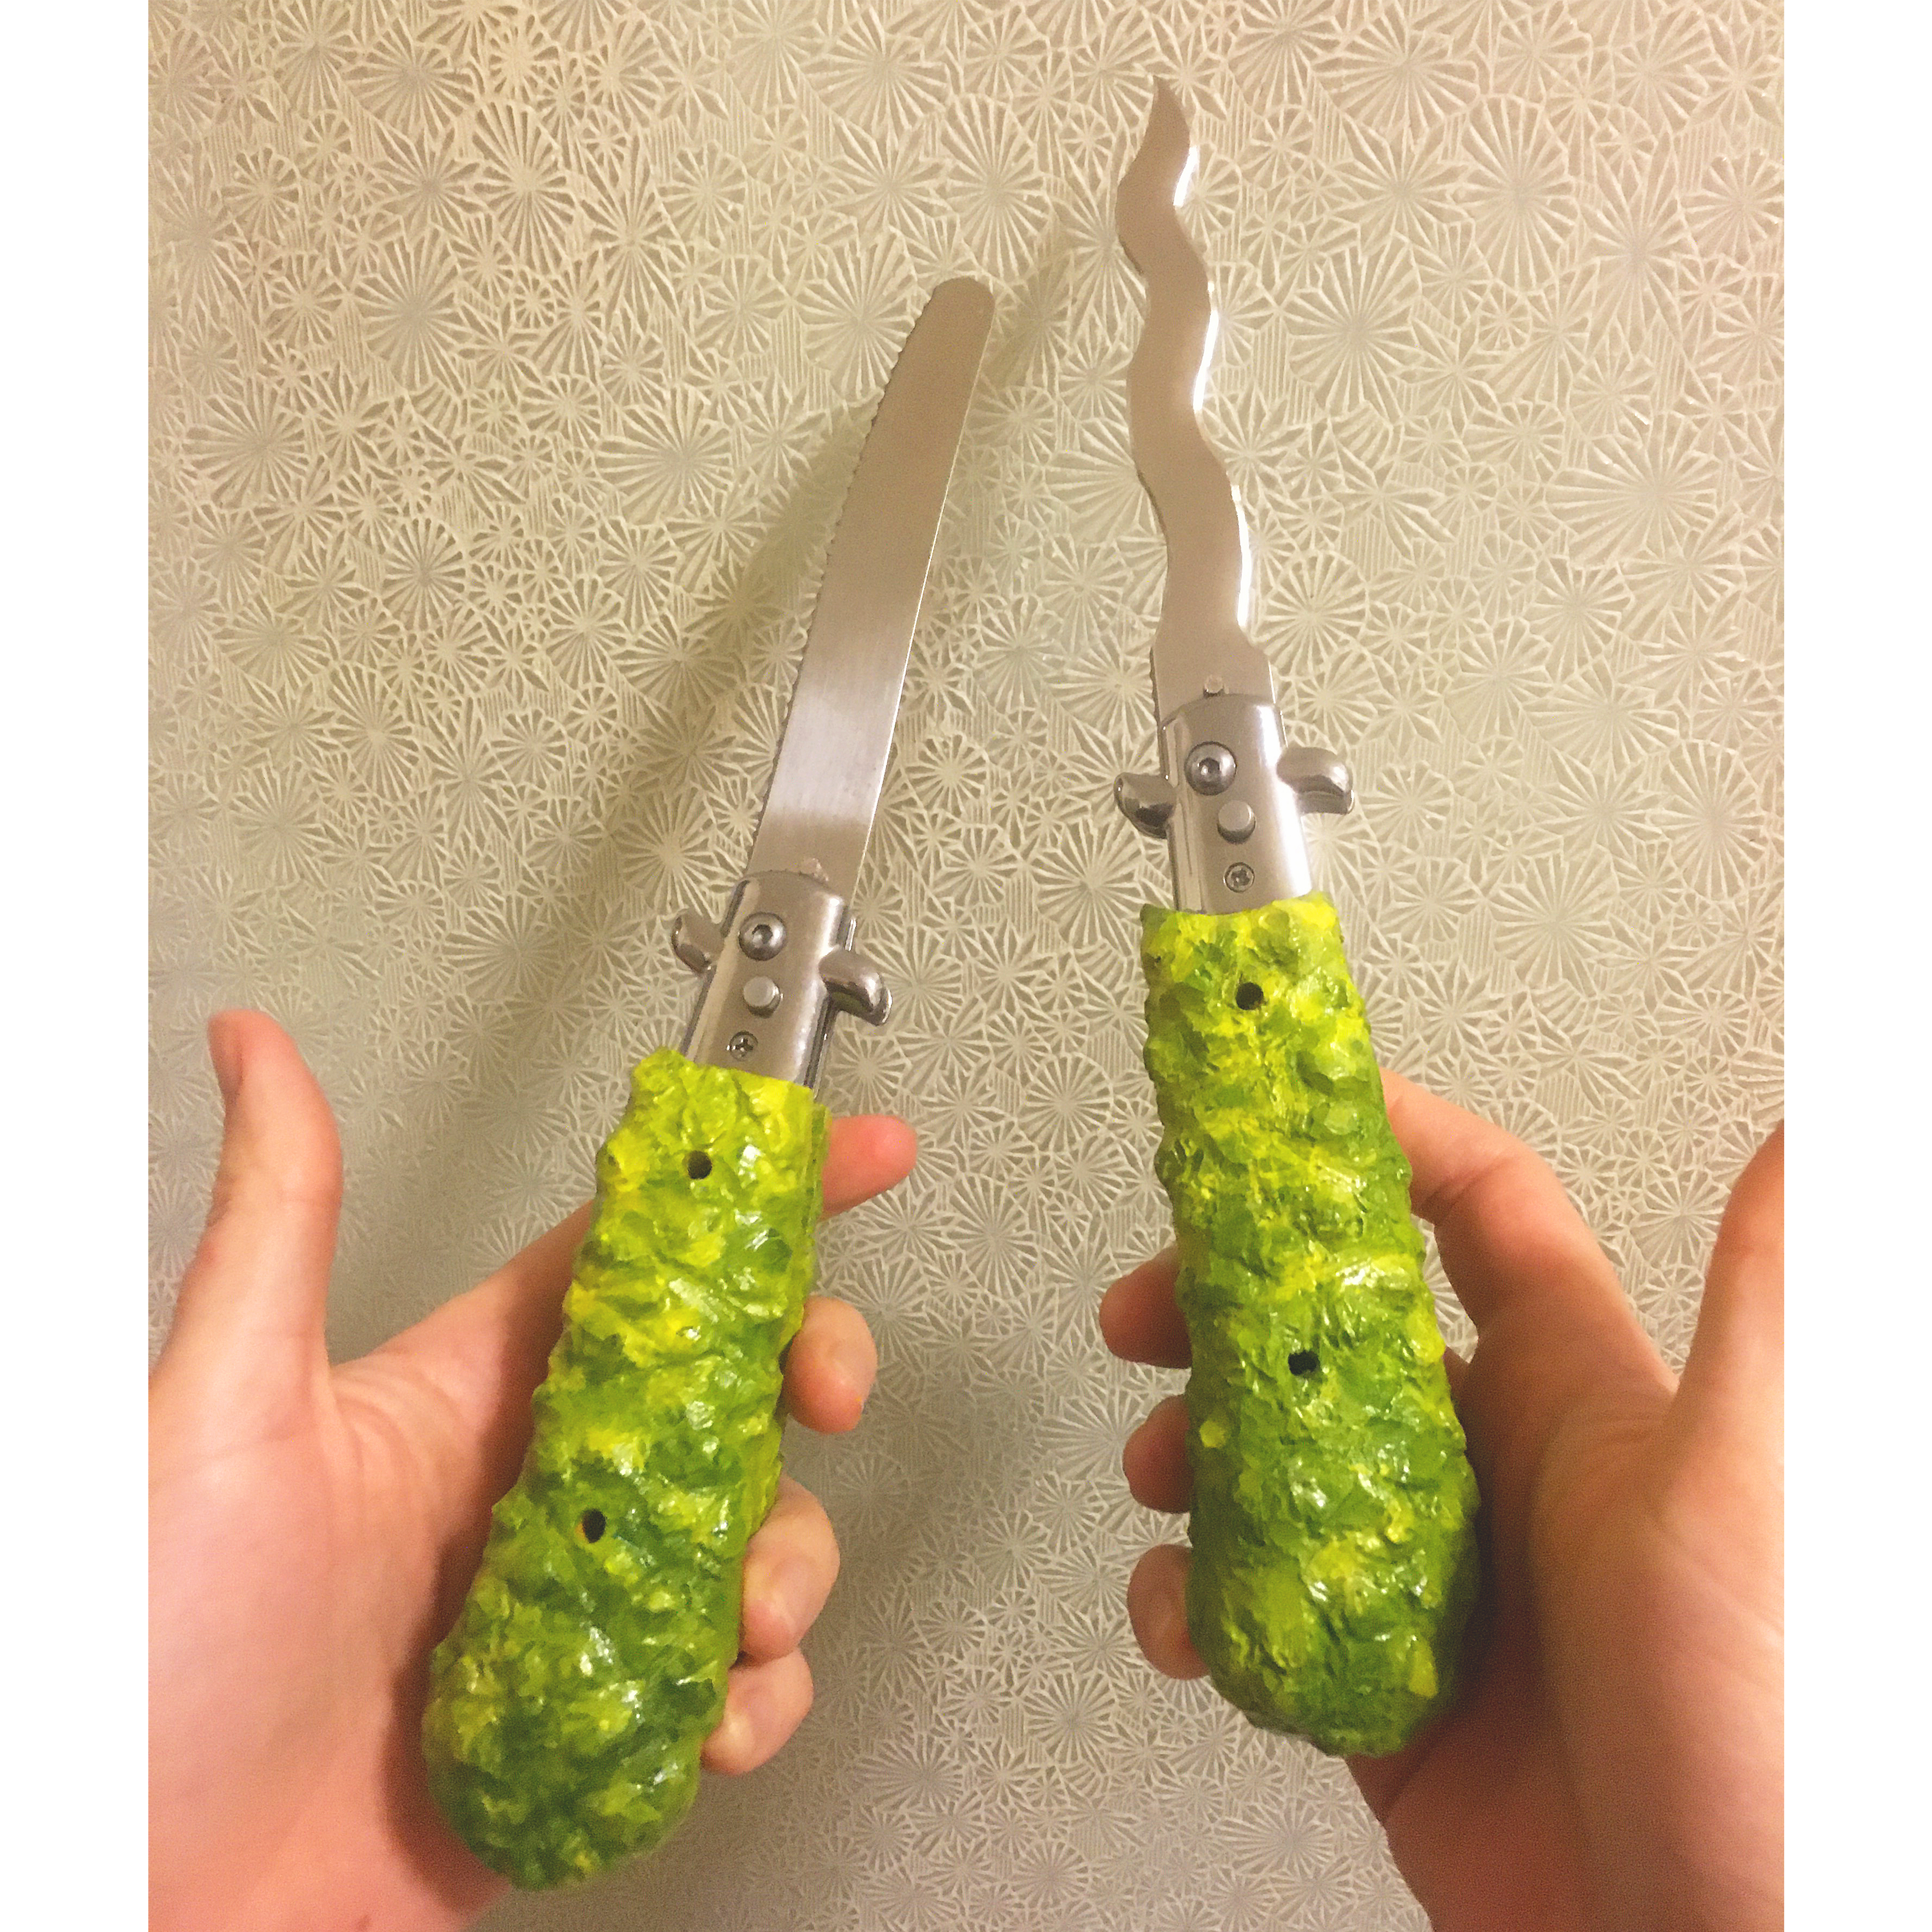 Brent Owens Pickle Switchblades, 2019, wood, stainless steel, acrylic, 10 x 2 x 2 inches